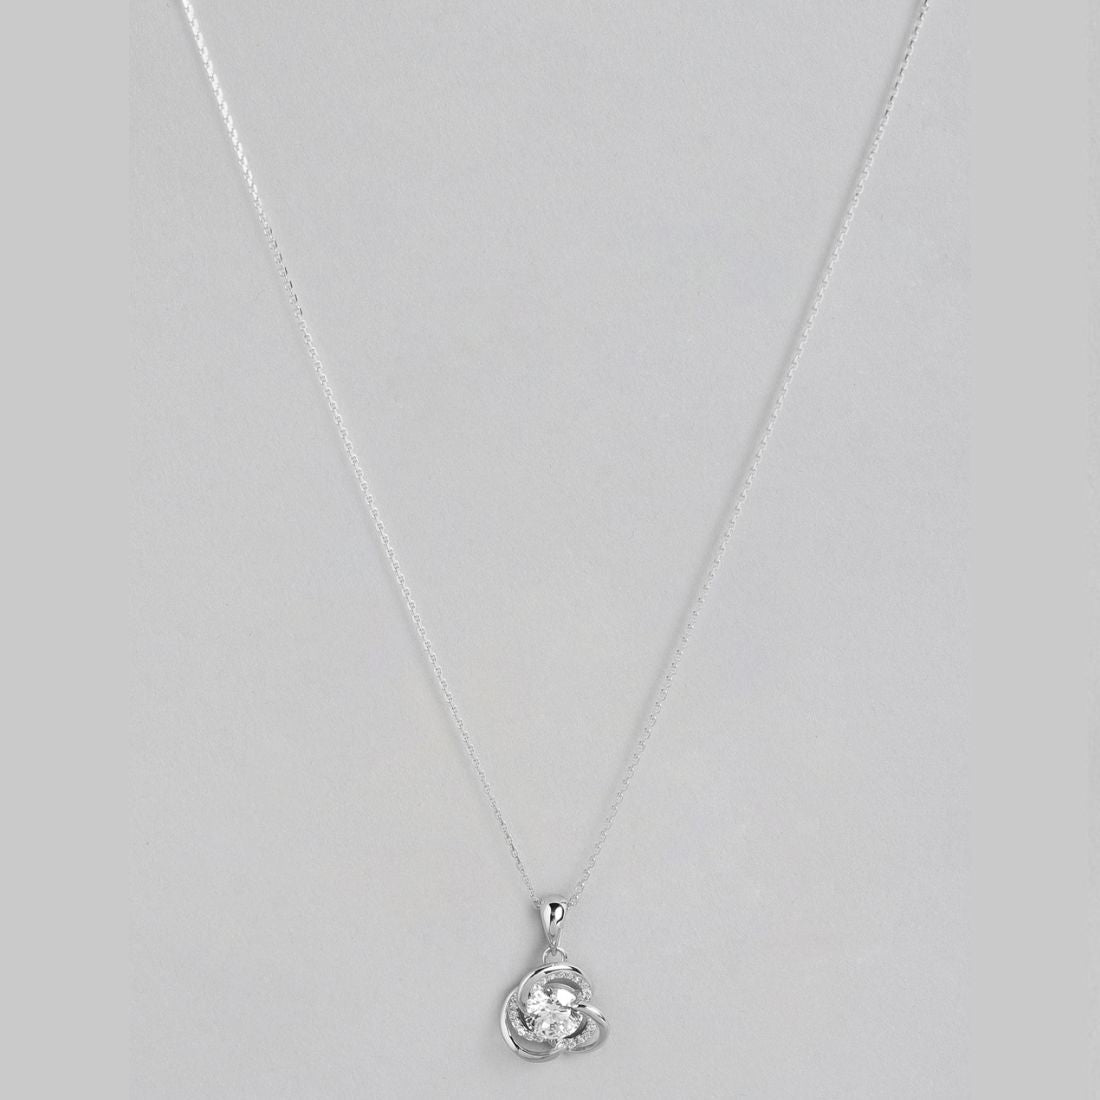 Crystal Clarity Rhodium Plated 925 Sterling Silver Necklace